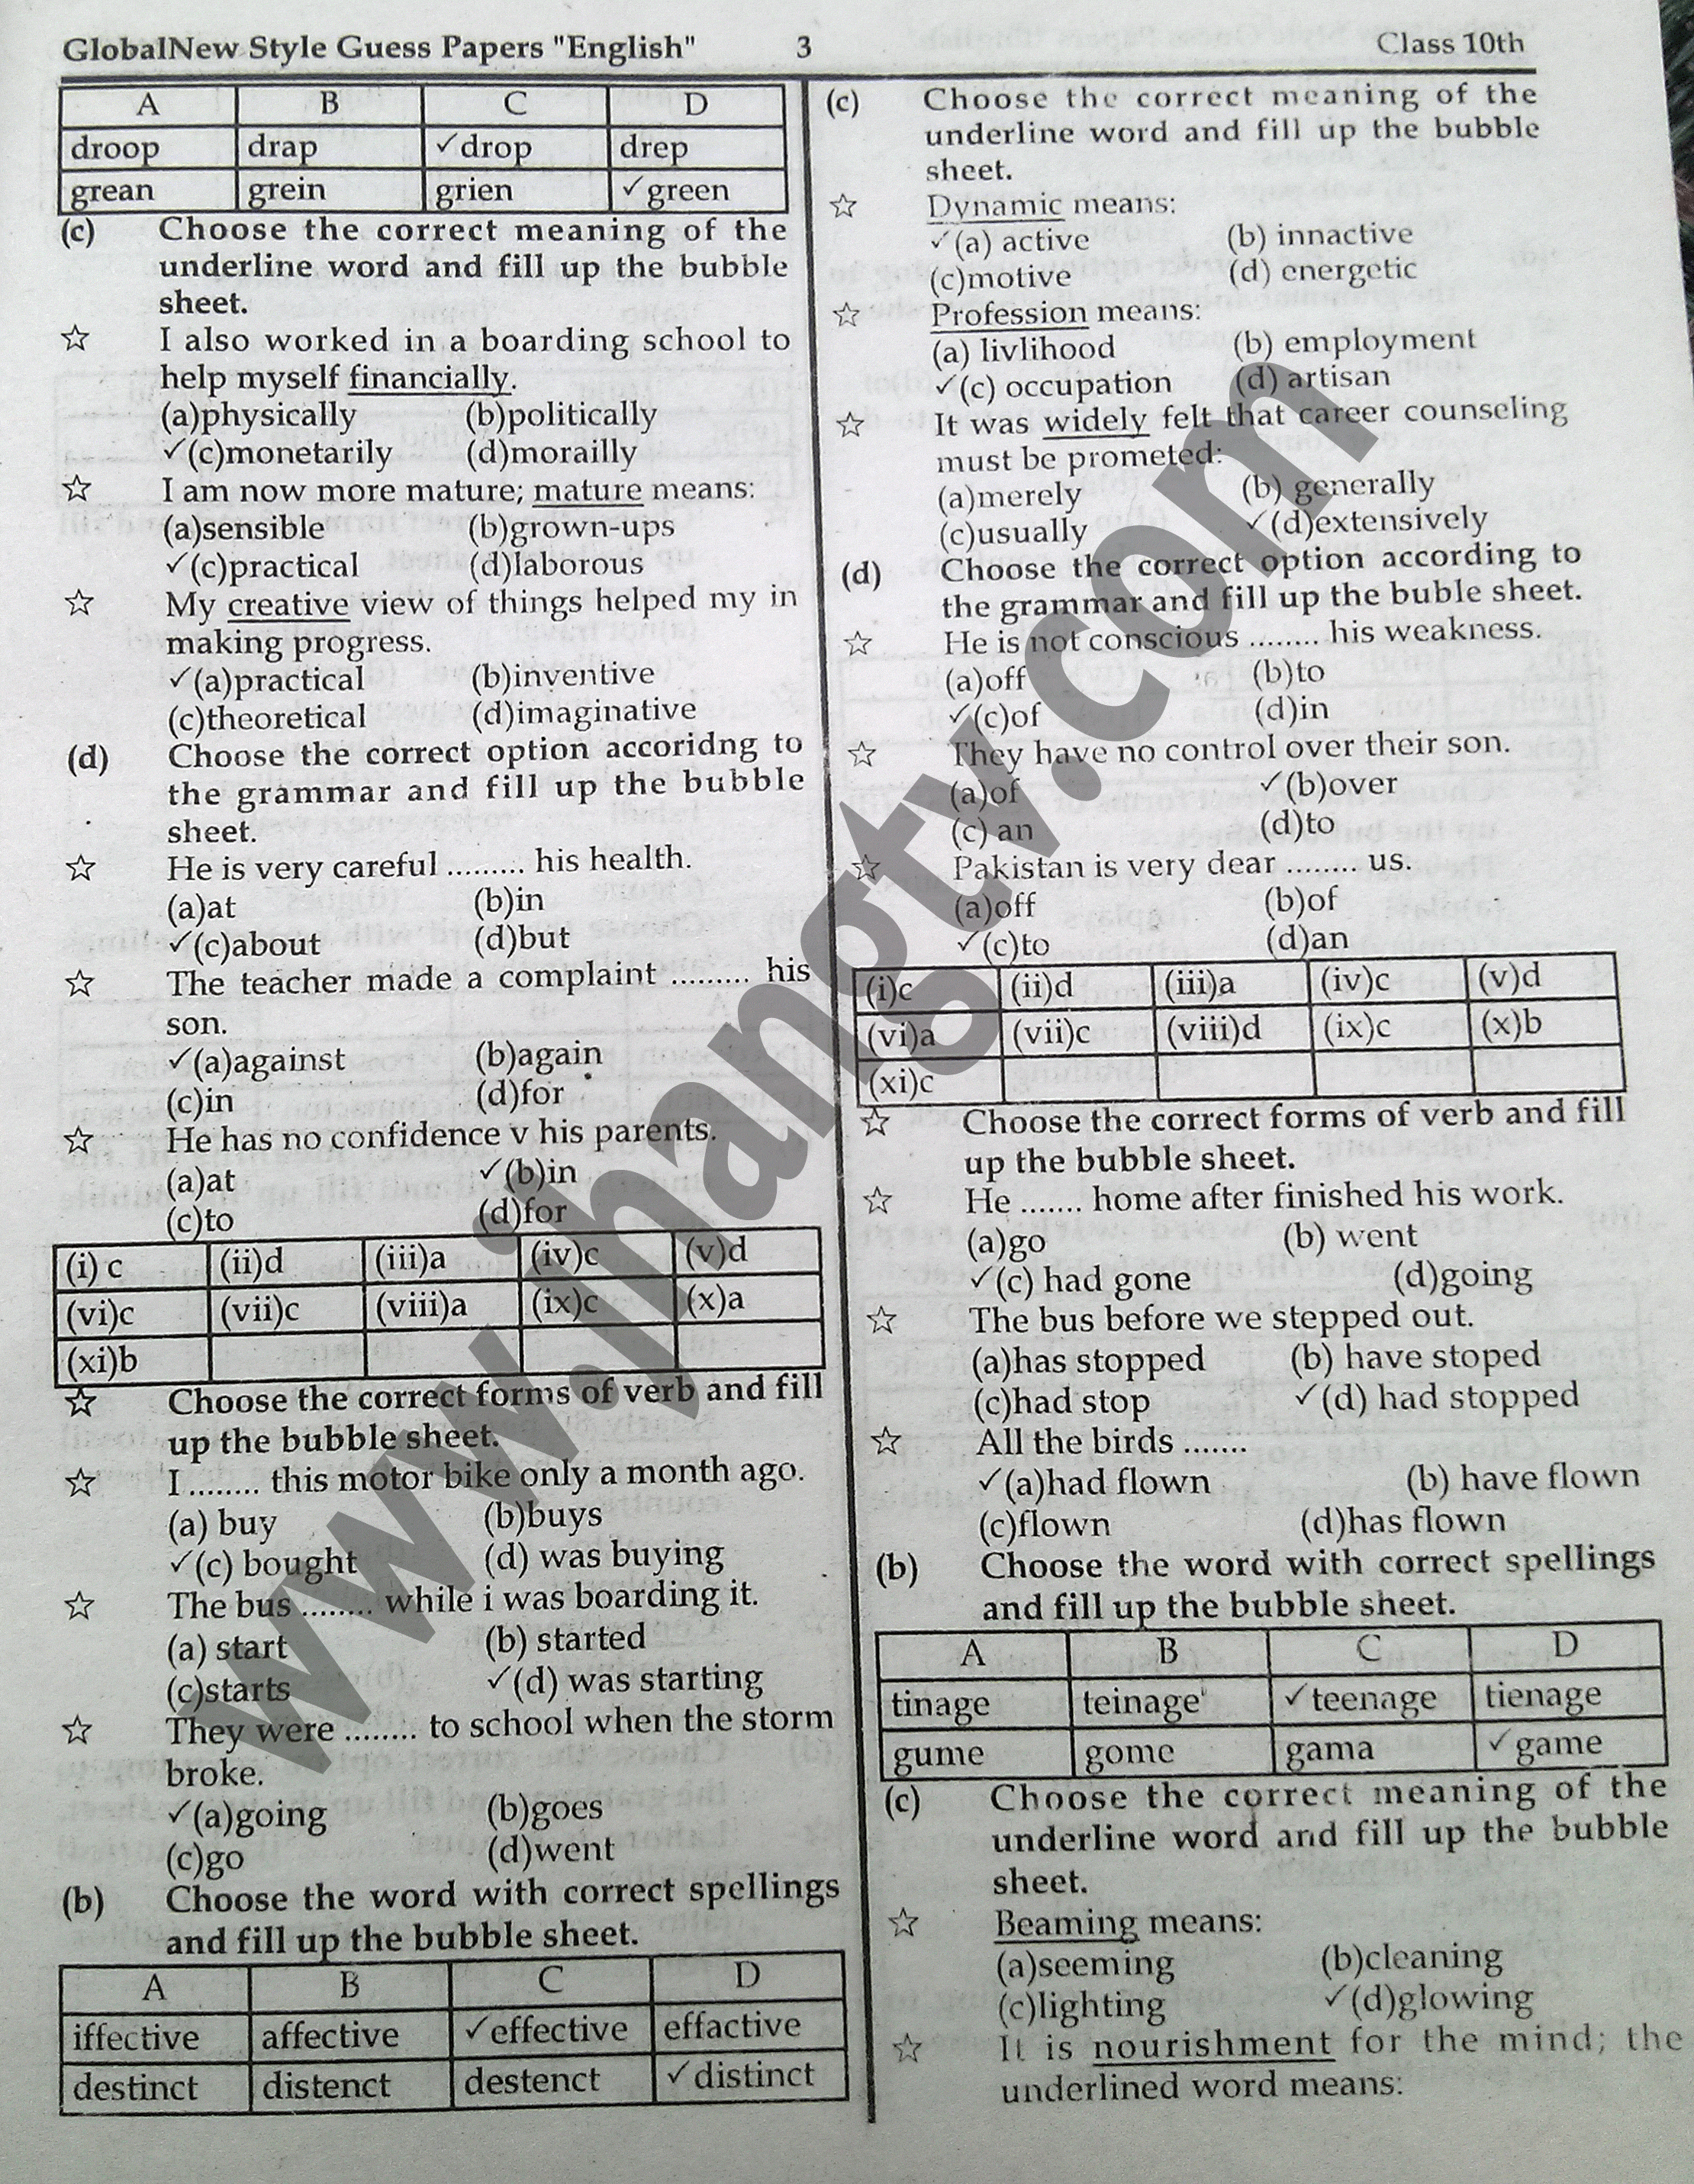 10th Class Guess Papers 2015 English (3)